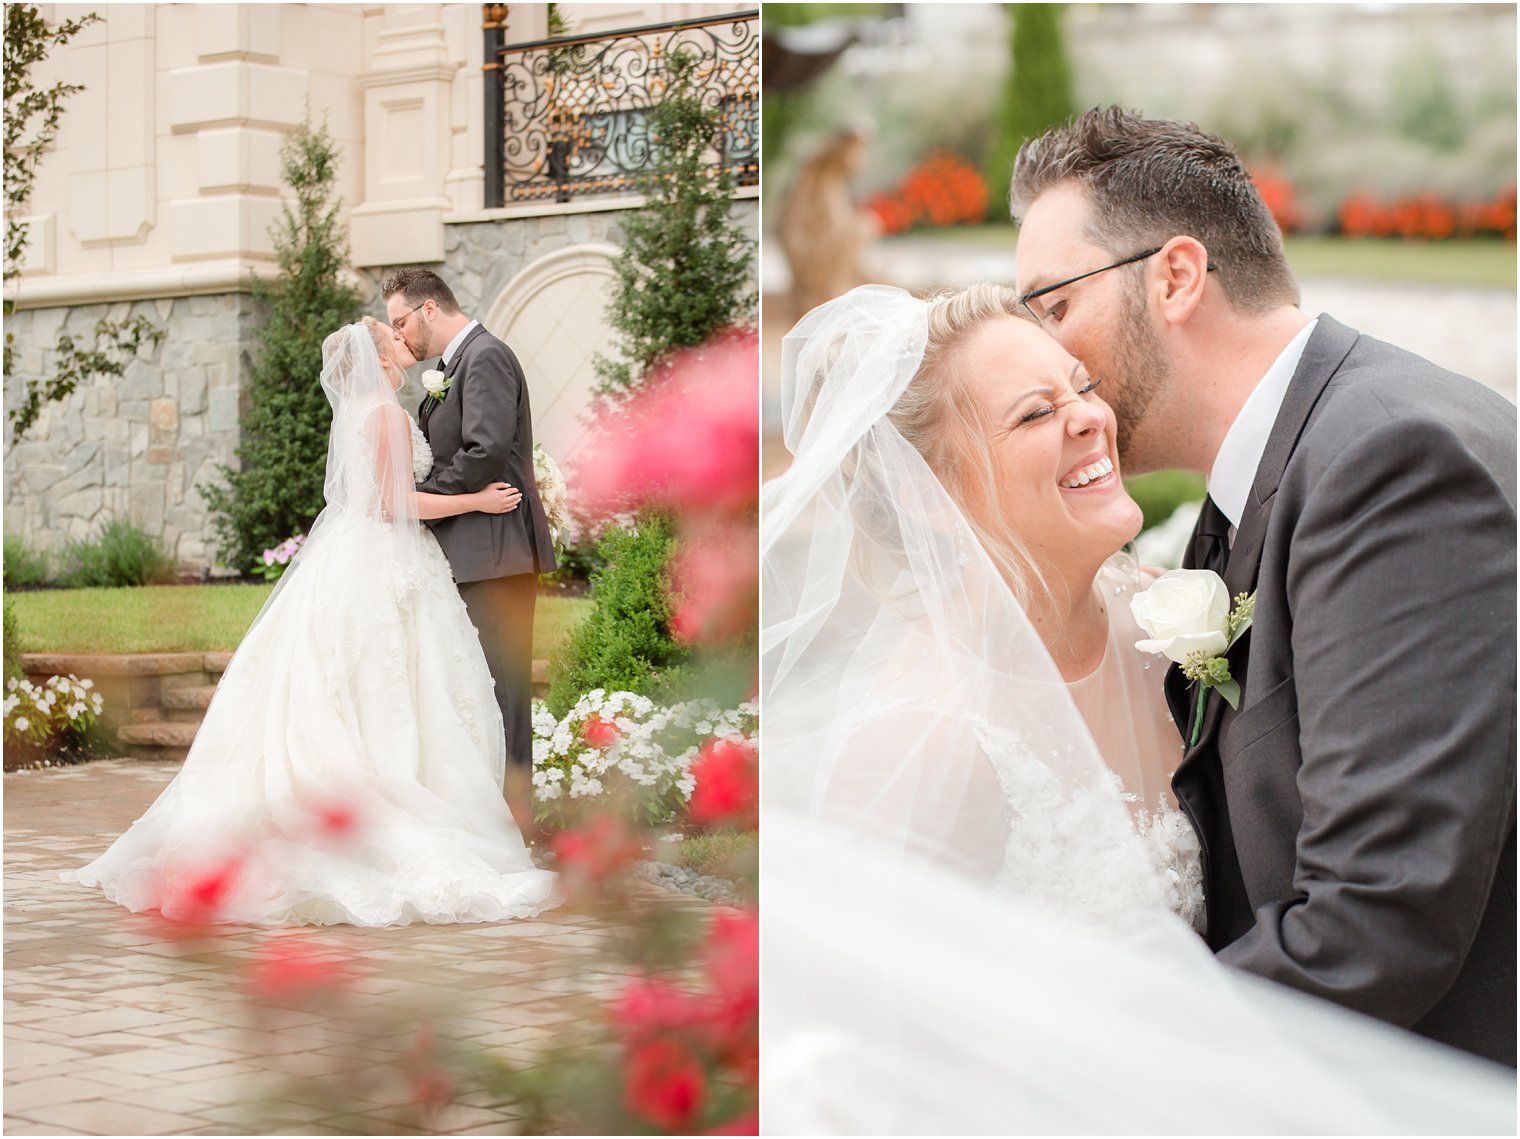 Elegant wedding day portraits at Legacy Castle in North Jersey by Idalia Photography